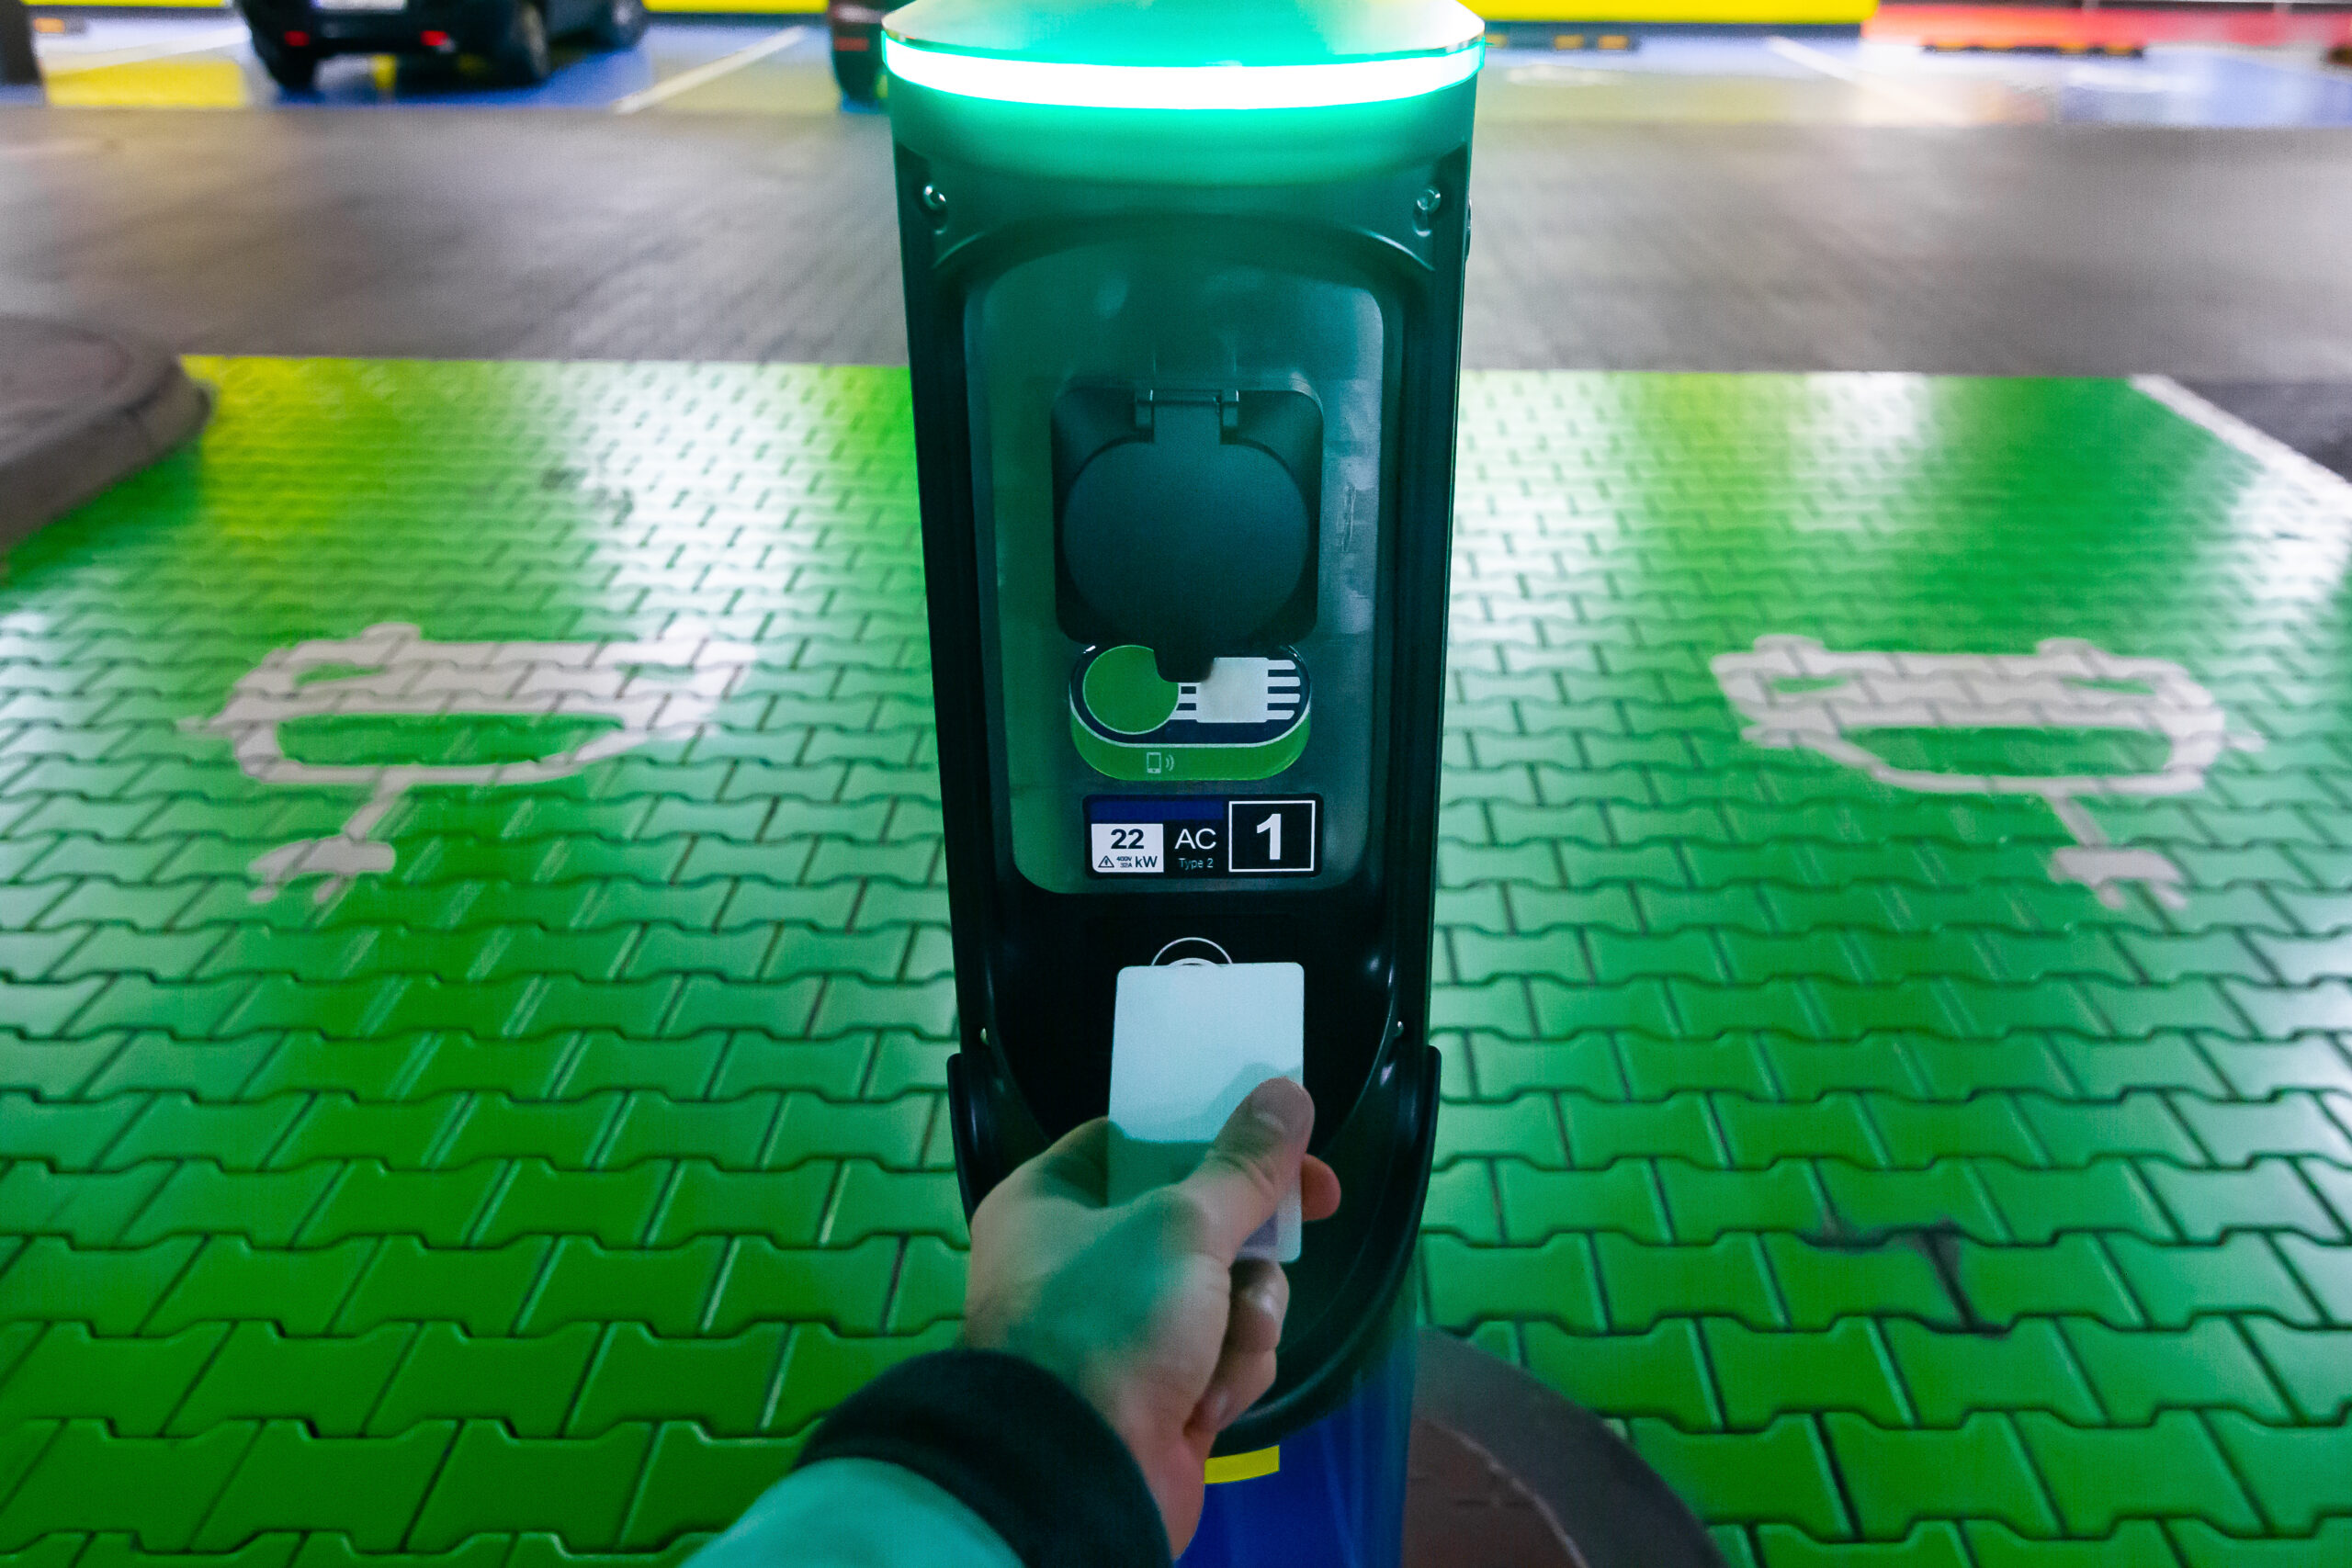 A Man Pays For Charging An Electric Car. Hand Holding Catd To Pay At Charging Station. Concept Of Green Electricity, Clean Environment, Emission Reduction.